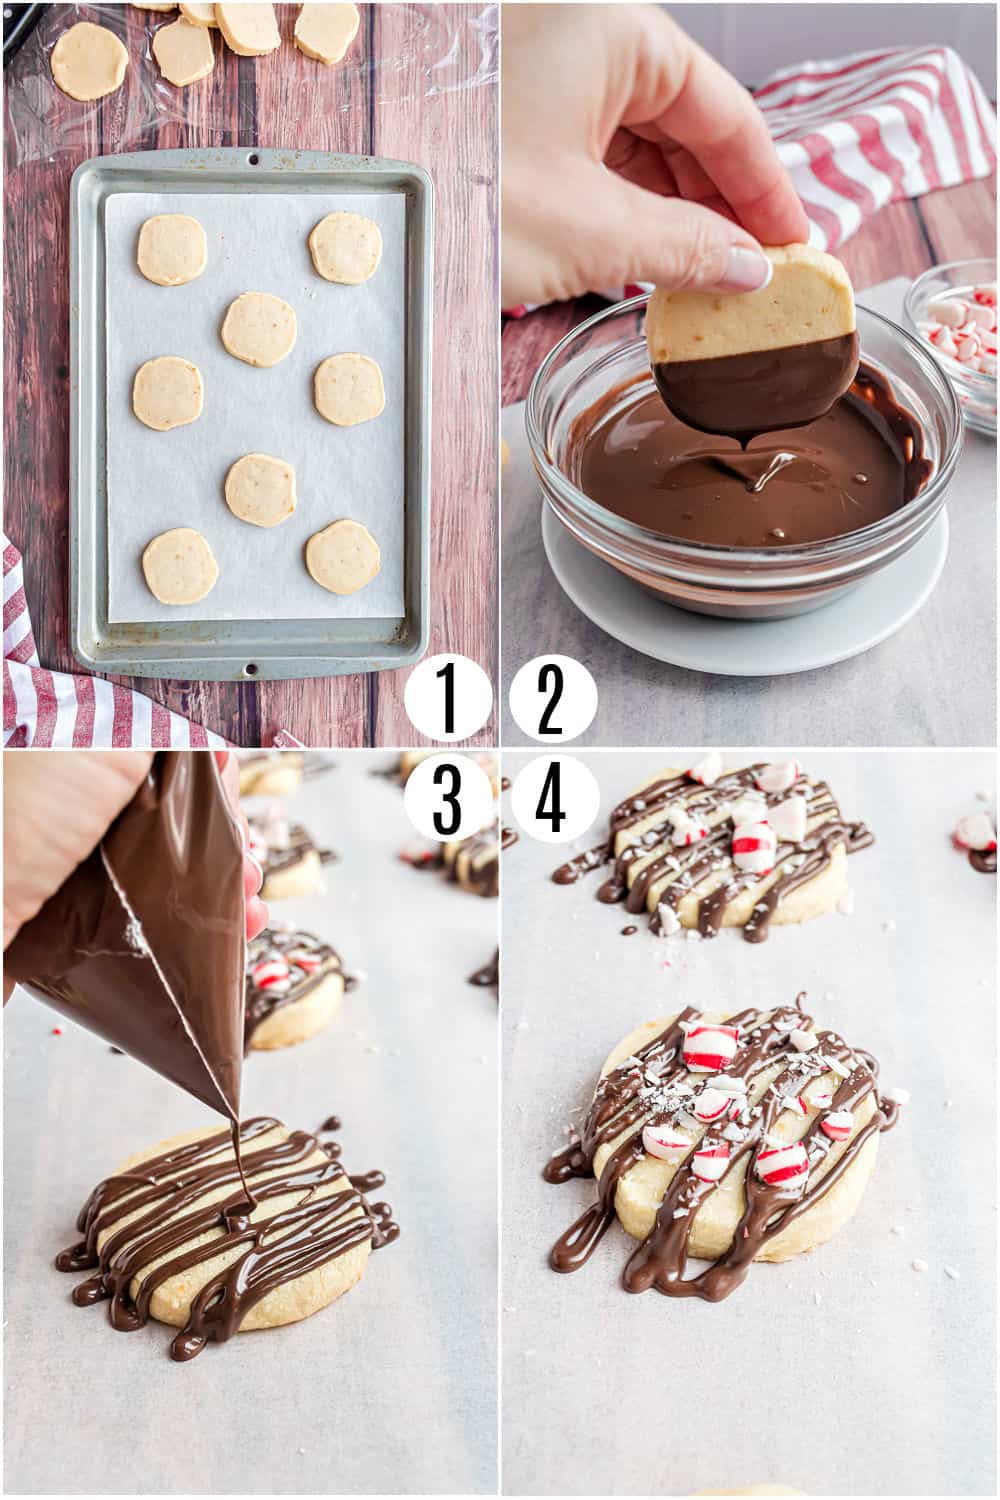 Step by step photos showing how to garnish shortbread cookies.